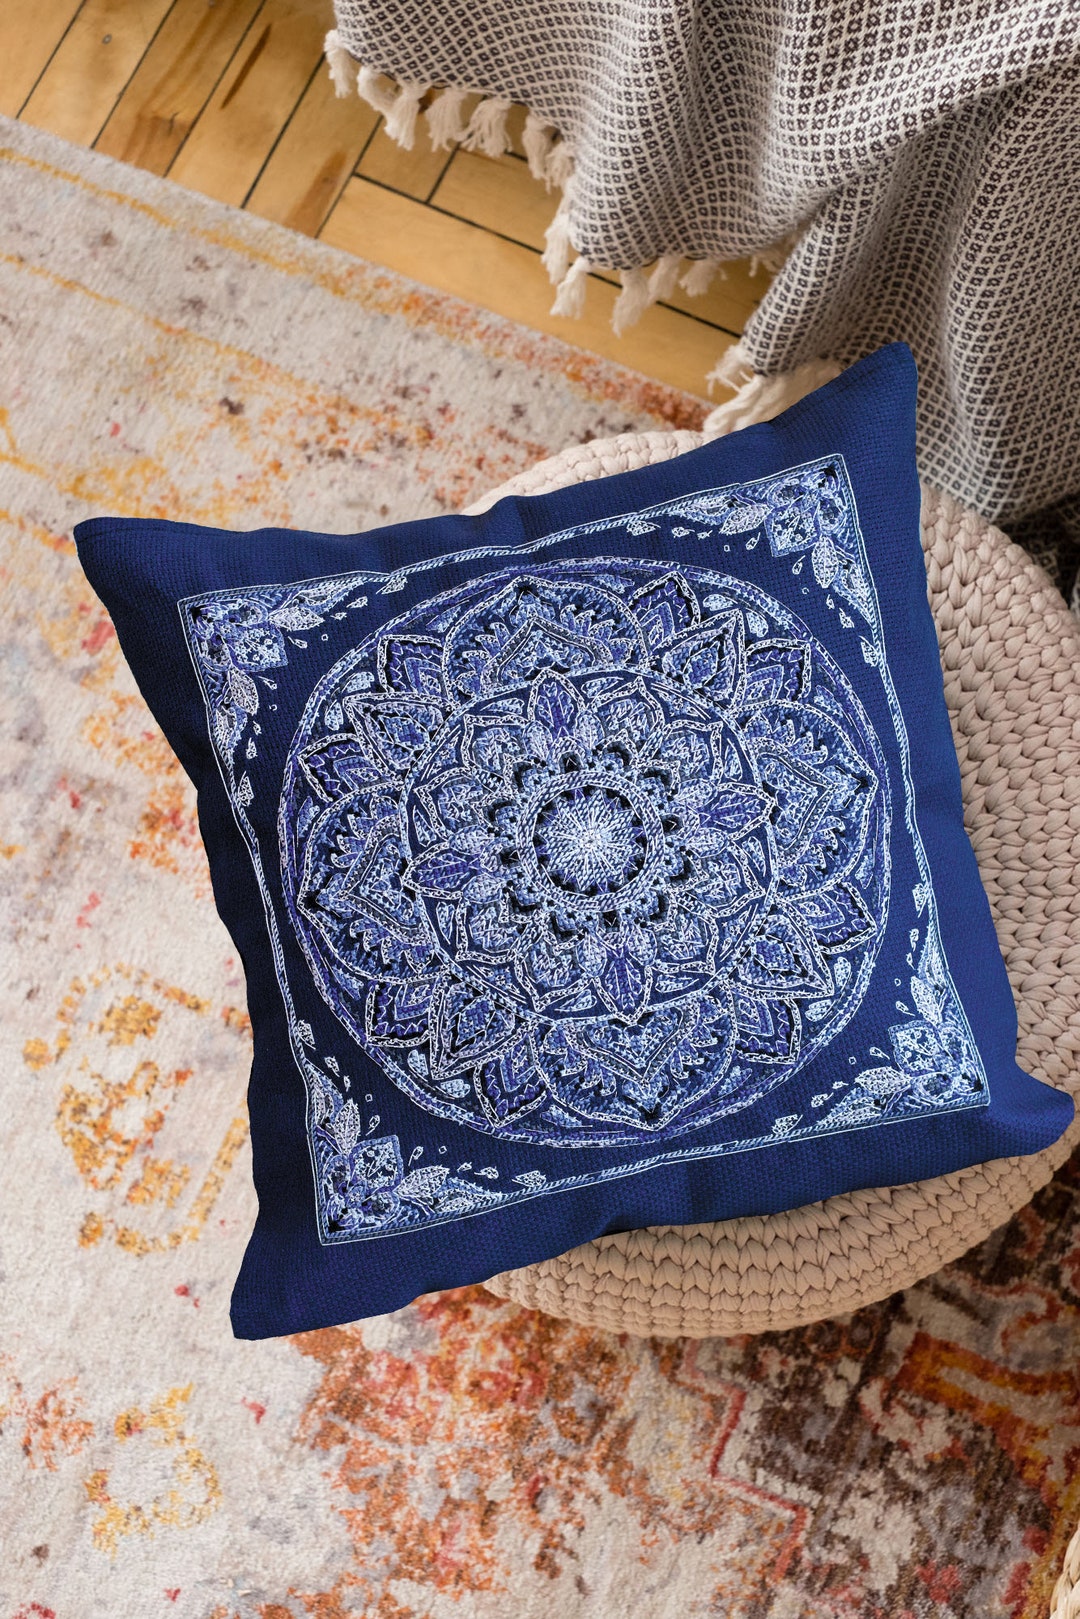 Kit to Create a Cross-stitch Pillow Silver Mandala Embroidery - Etsy